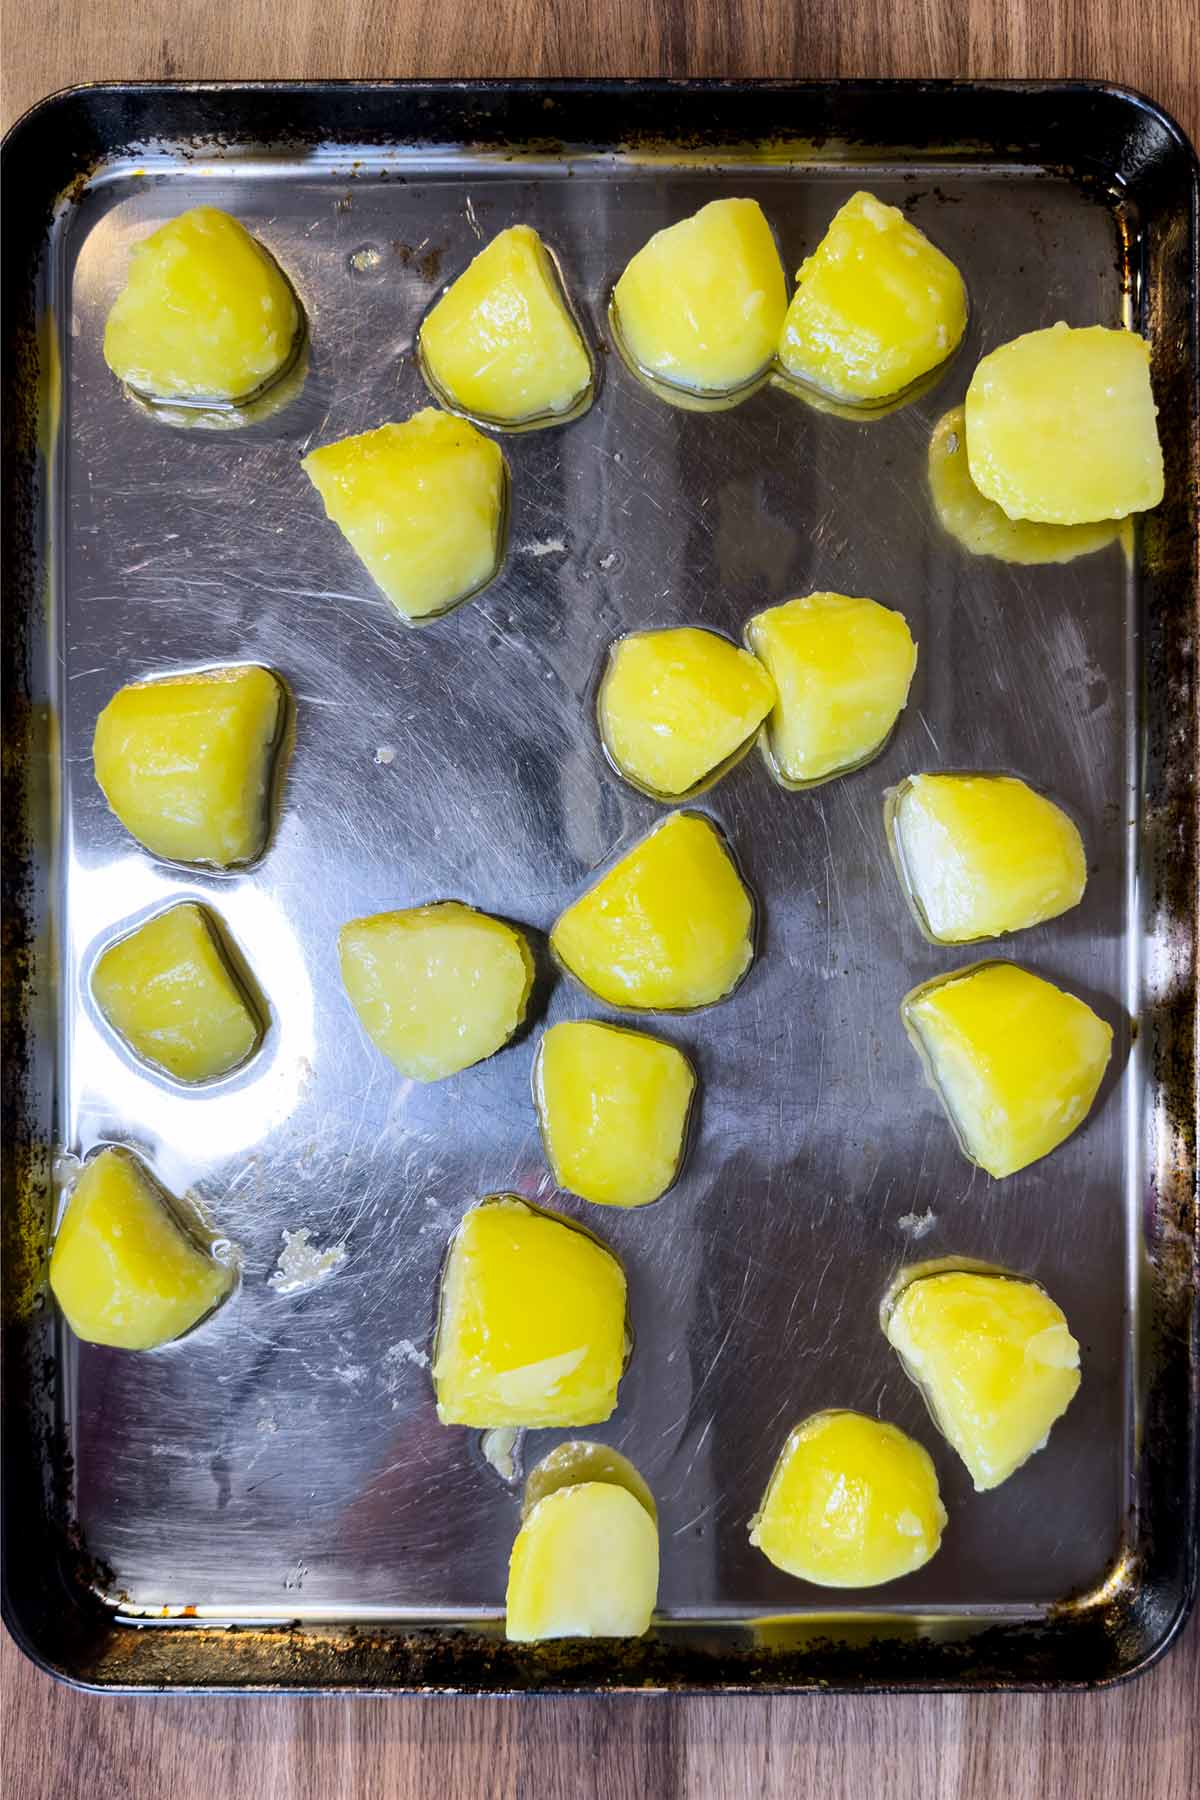 Quartered potatoes added to the hot fat.